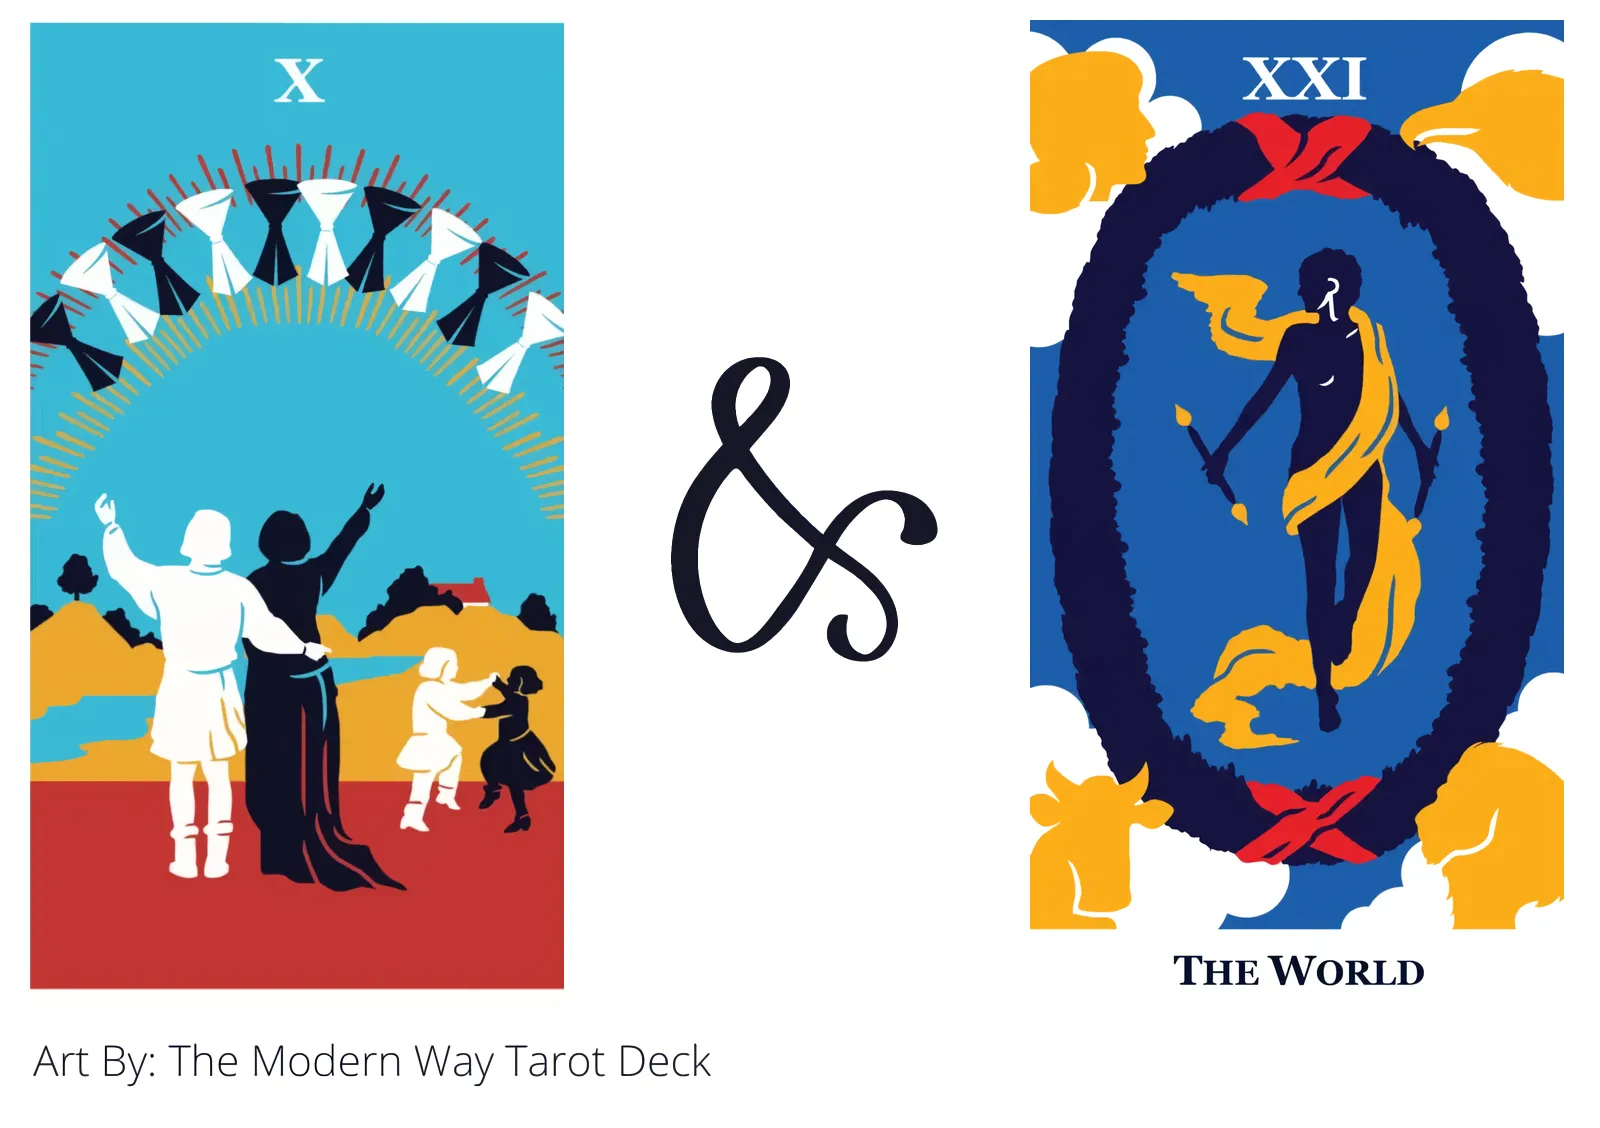 ten of cups and the world tarot cards together